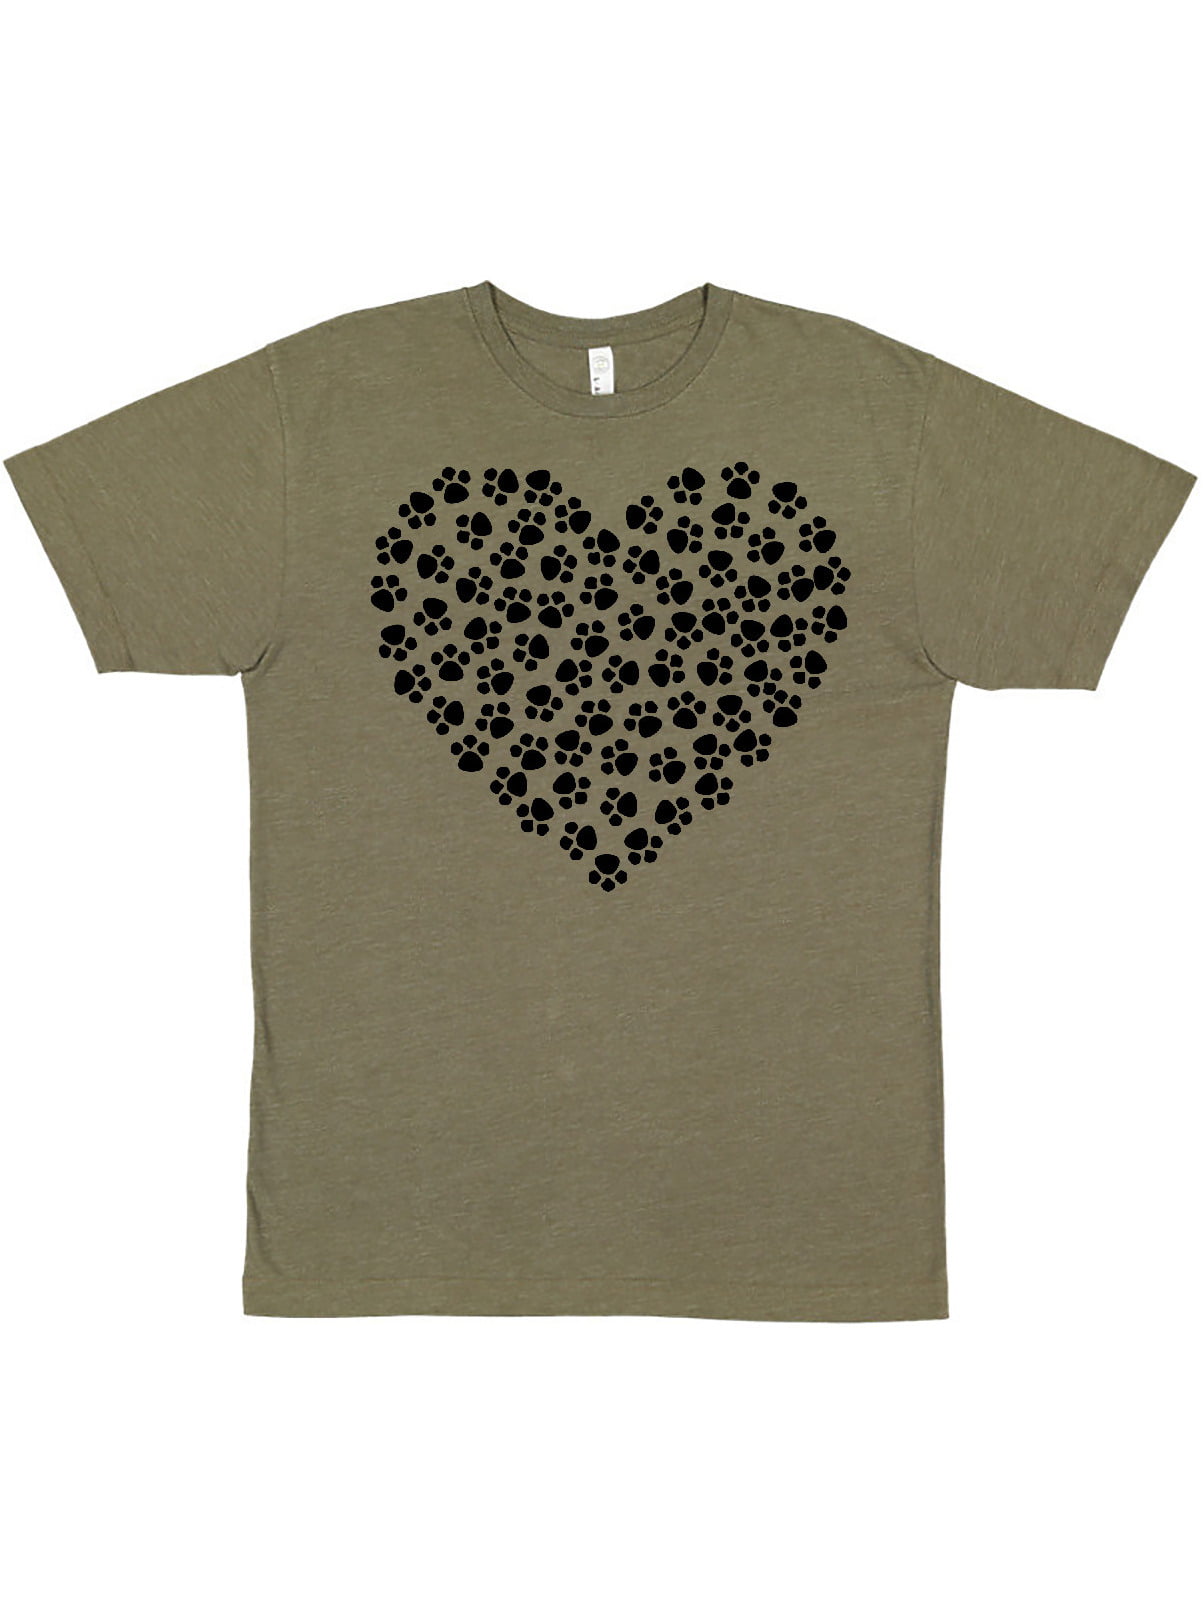 Inktastic Heart Paws, Dog Paws, Puppy Paws - Black Adult T-Shirt Male Military Green -